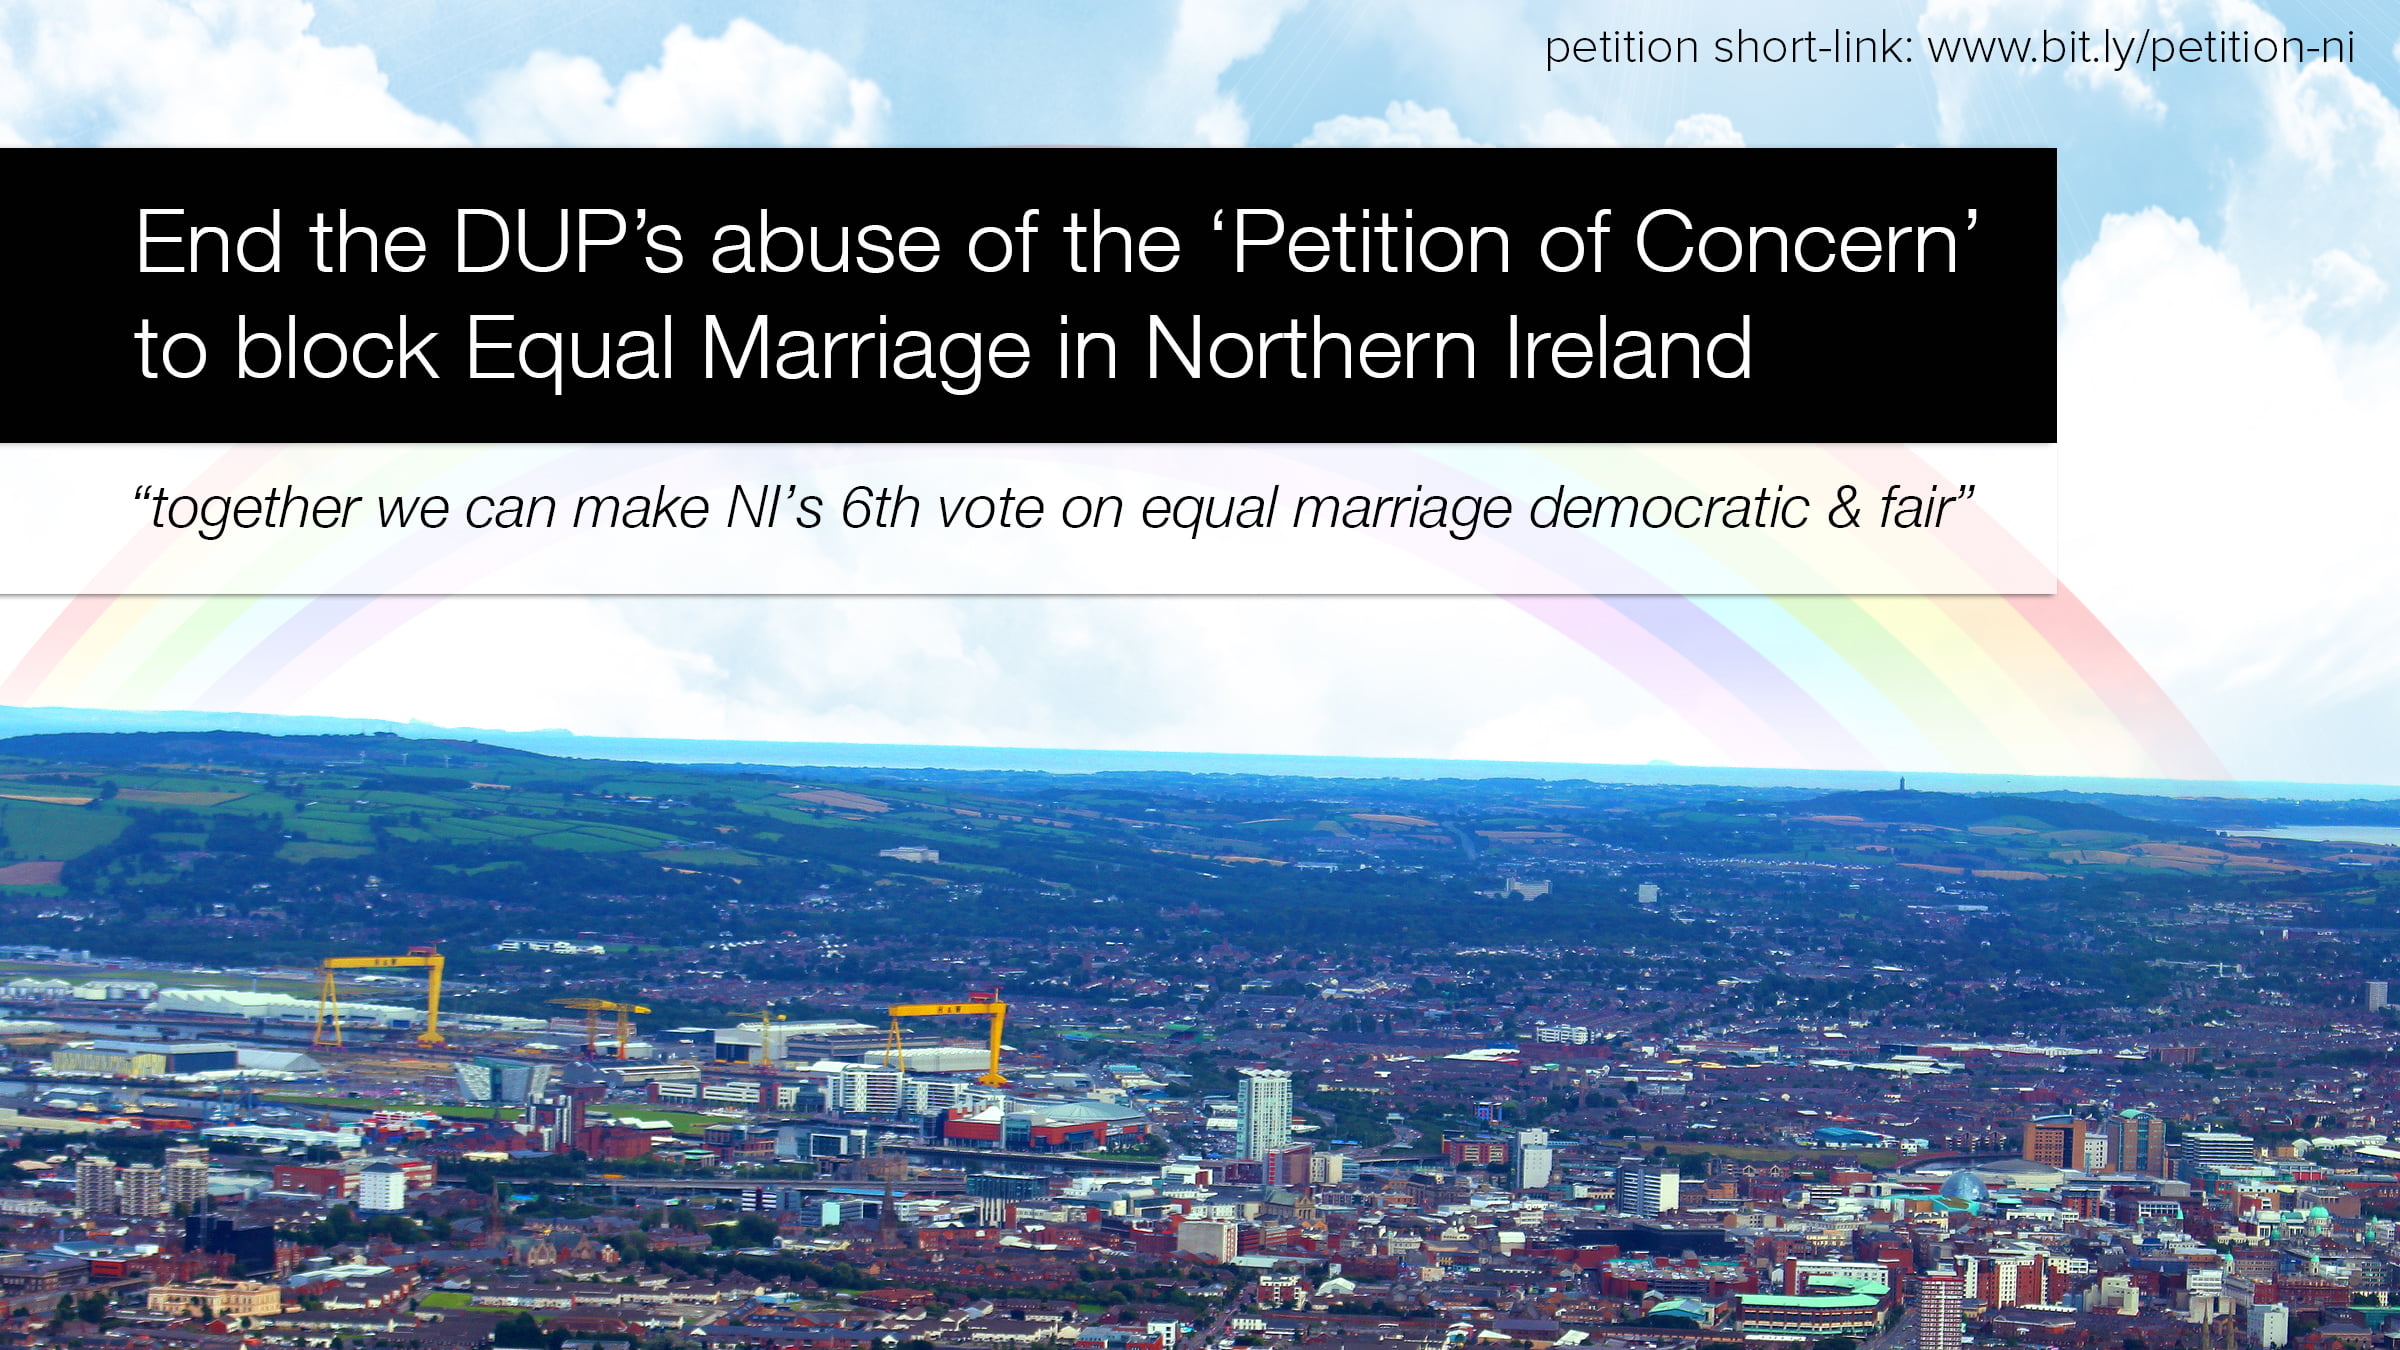 Petition Update: Almost at 4,000 Signatures and support from Peter Tatchell, STOP-Homophobia, Sinn Fein & Alliance LGBT